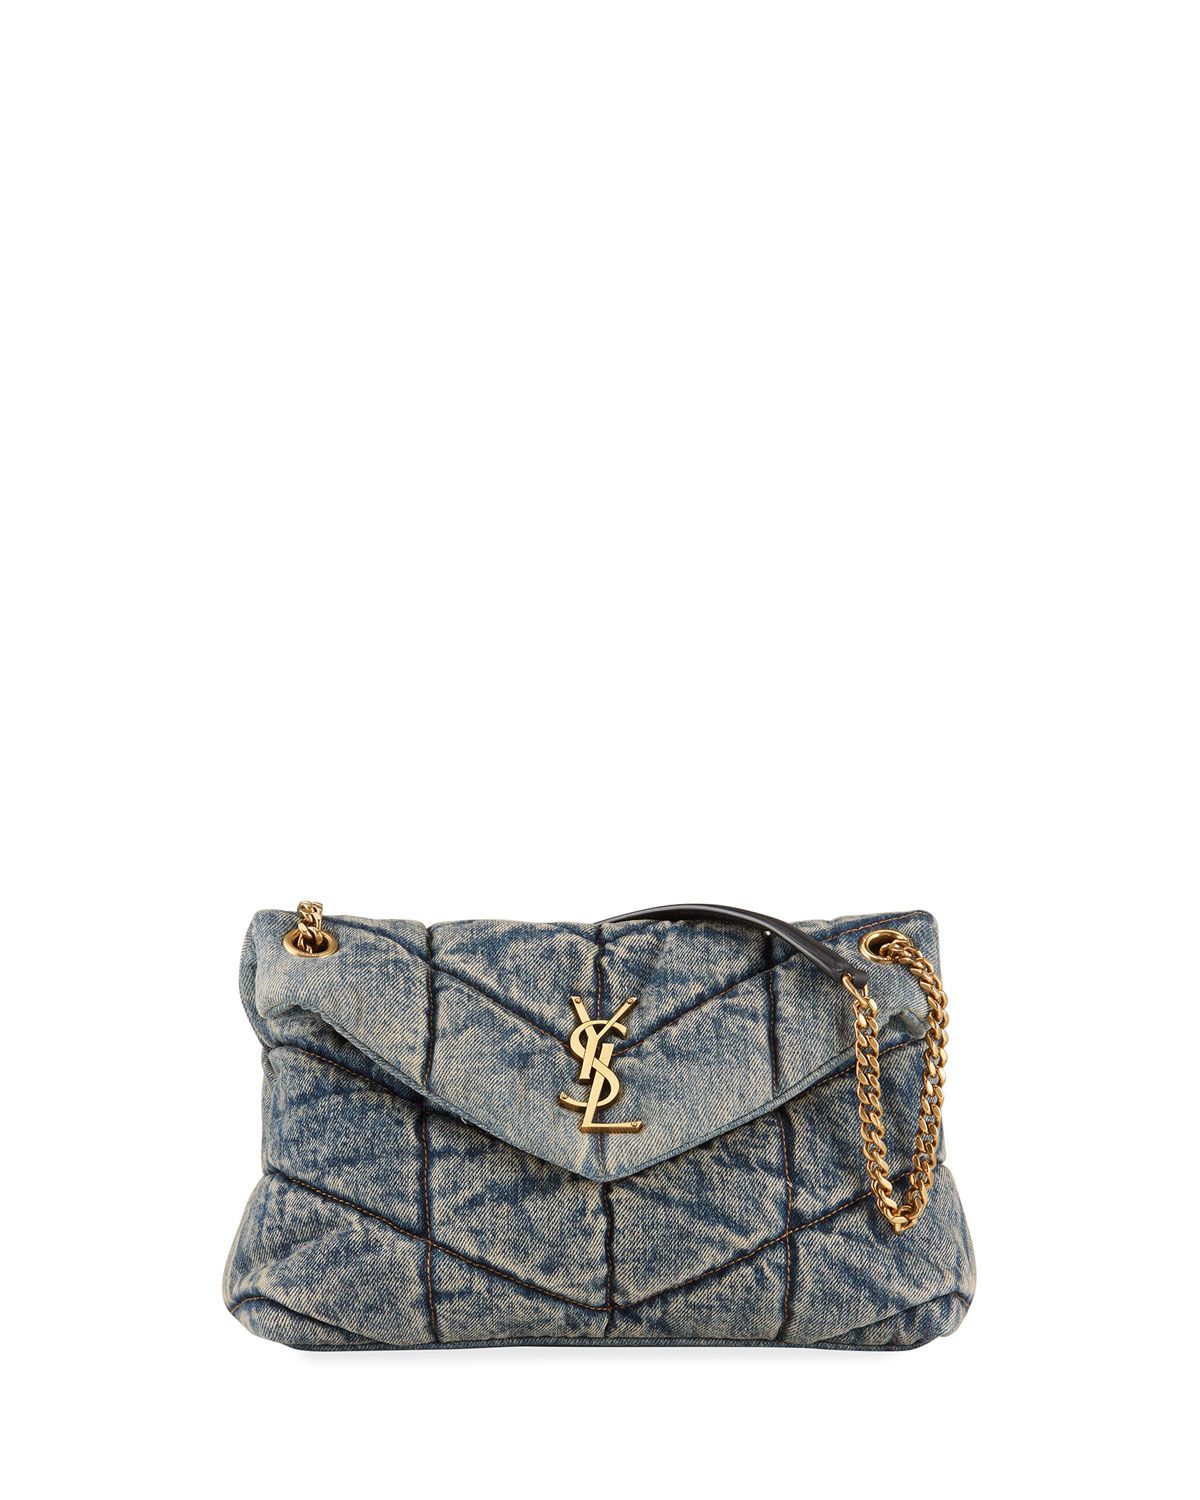 LouLou YSL Small Quilted Denim Shoulder Bag | Neiman Marcus